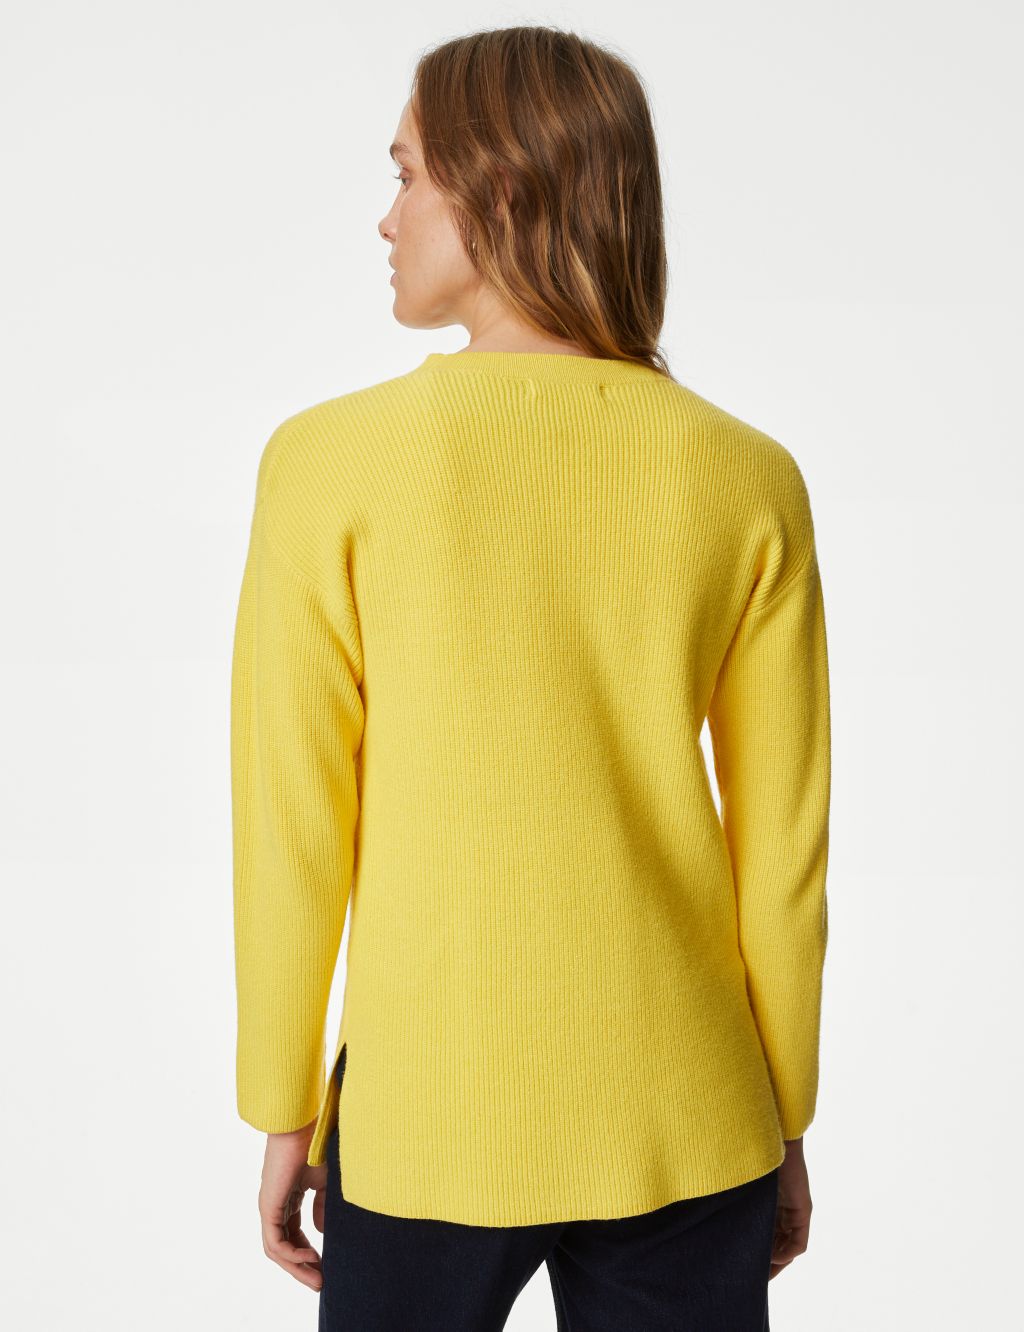 Soft Touch Ribbed Longline Jumper image 5